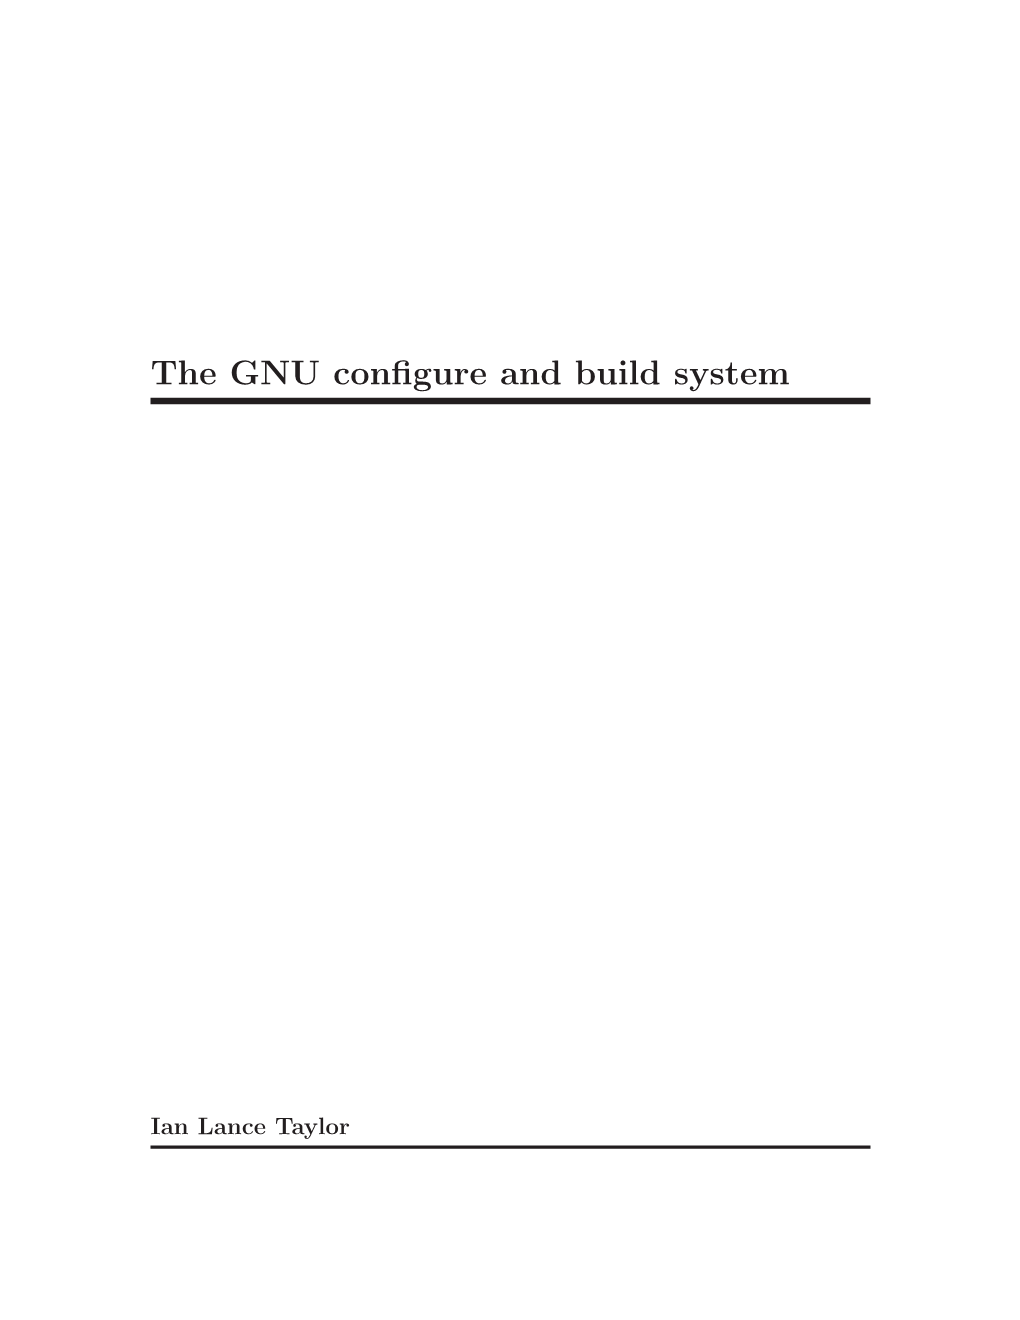 The GNU Configure and Build System